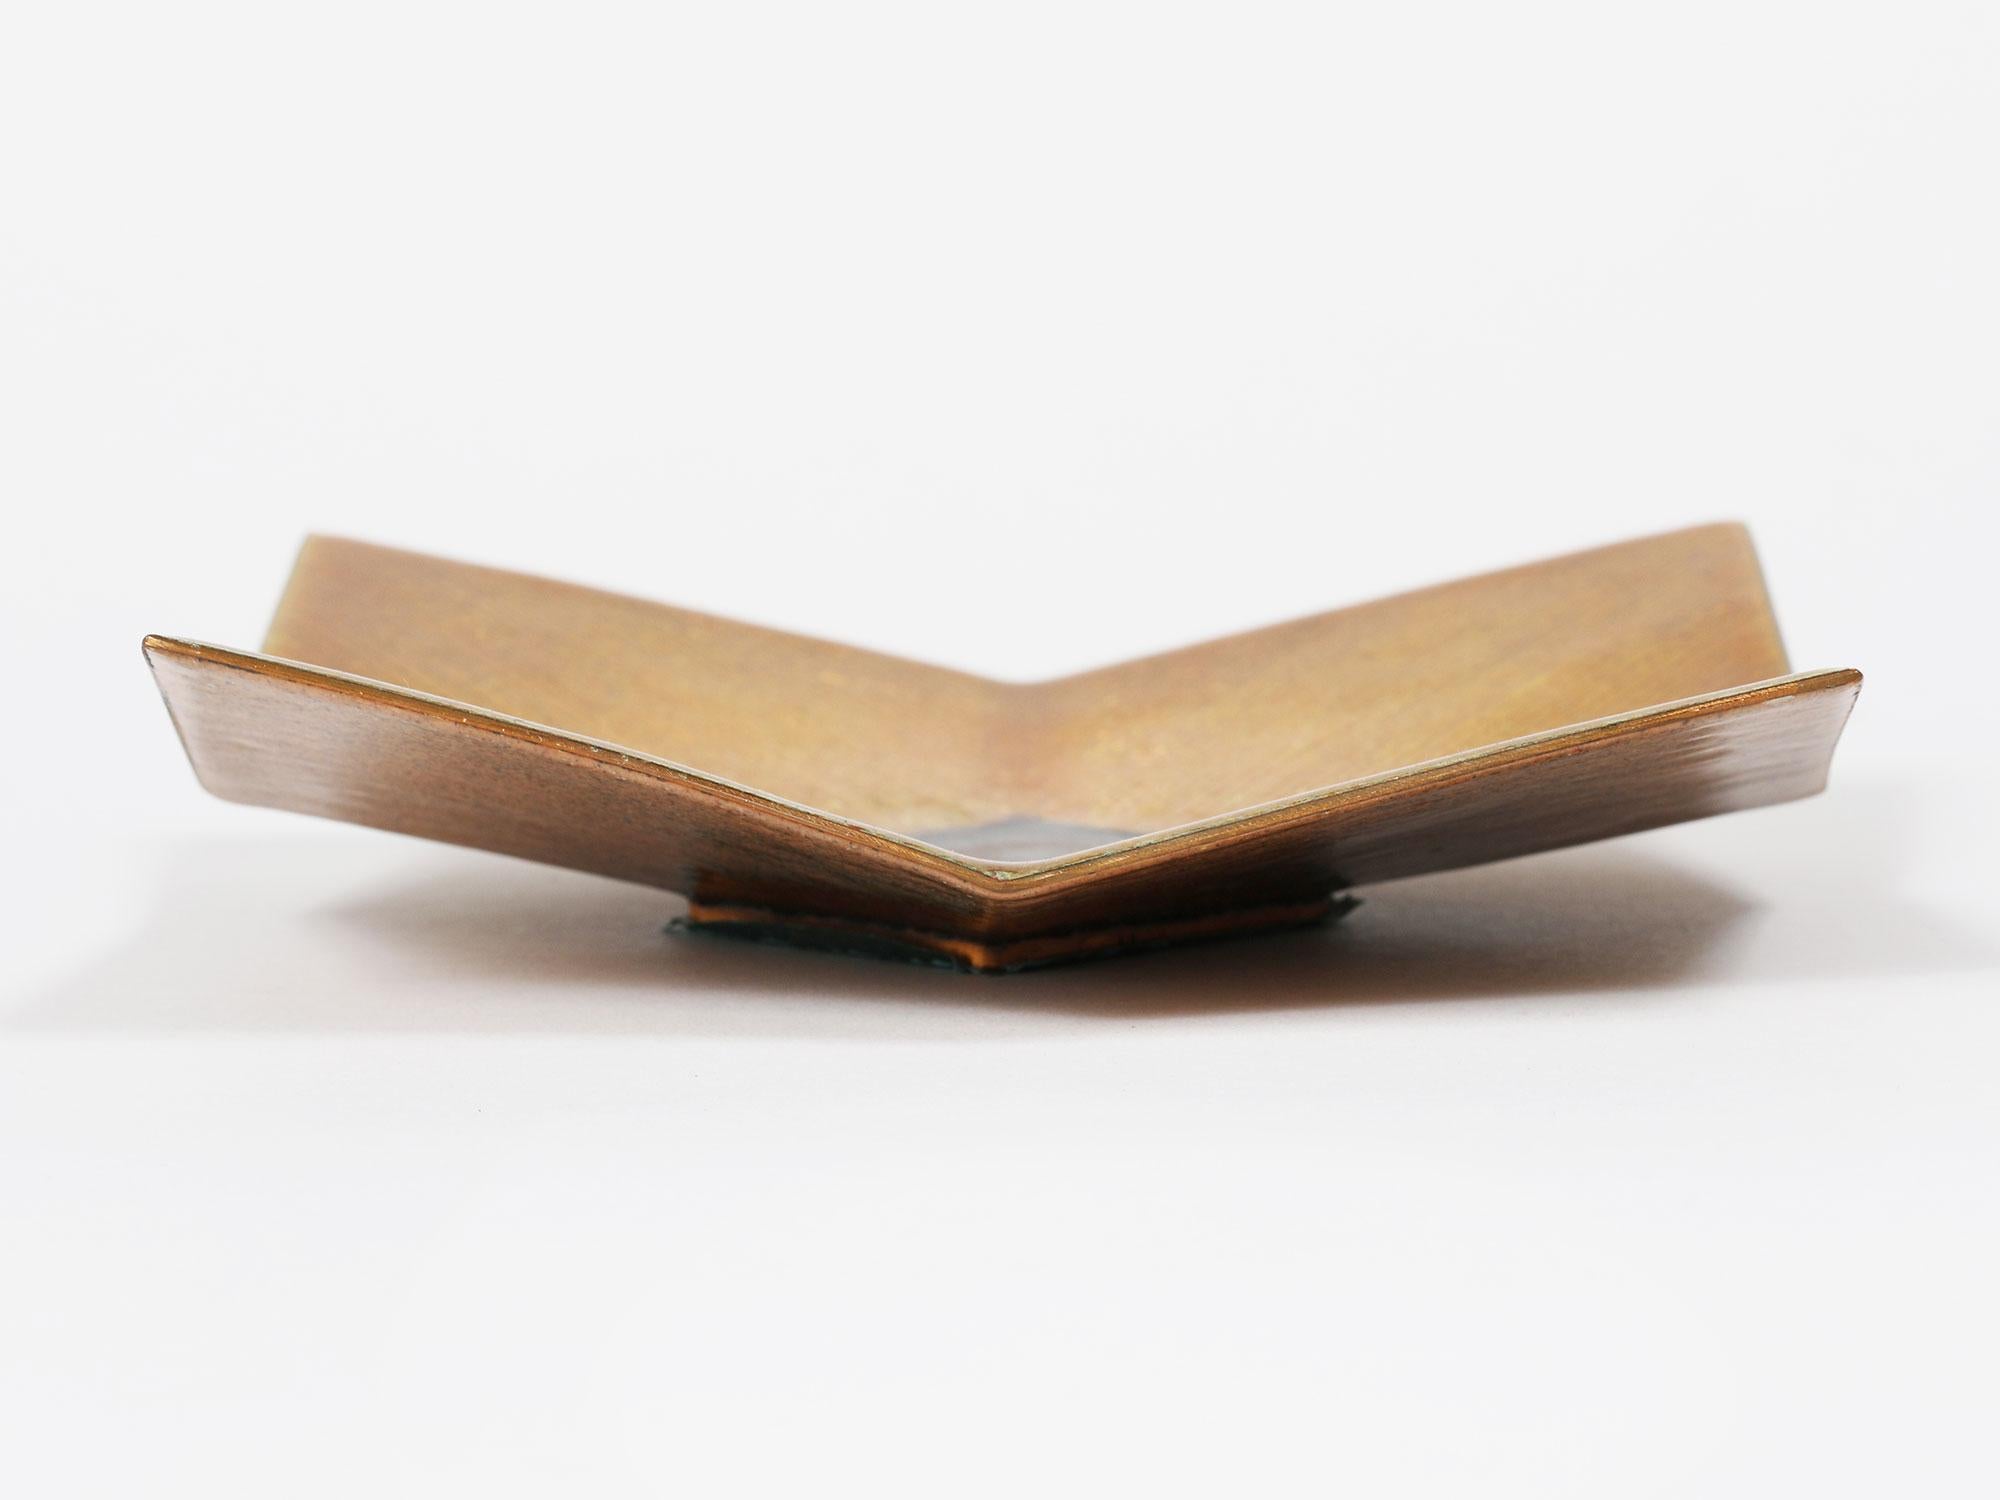 Beautiful geometric copper and enamel tray attributed to Gio Ponti for Studio Del Campo. Made in Italy in the 1950s.